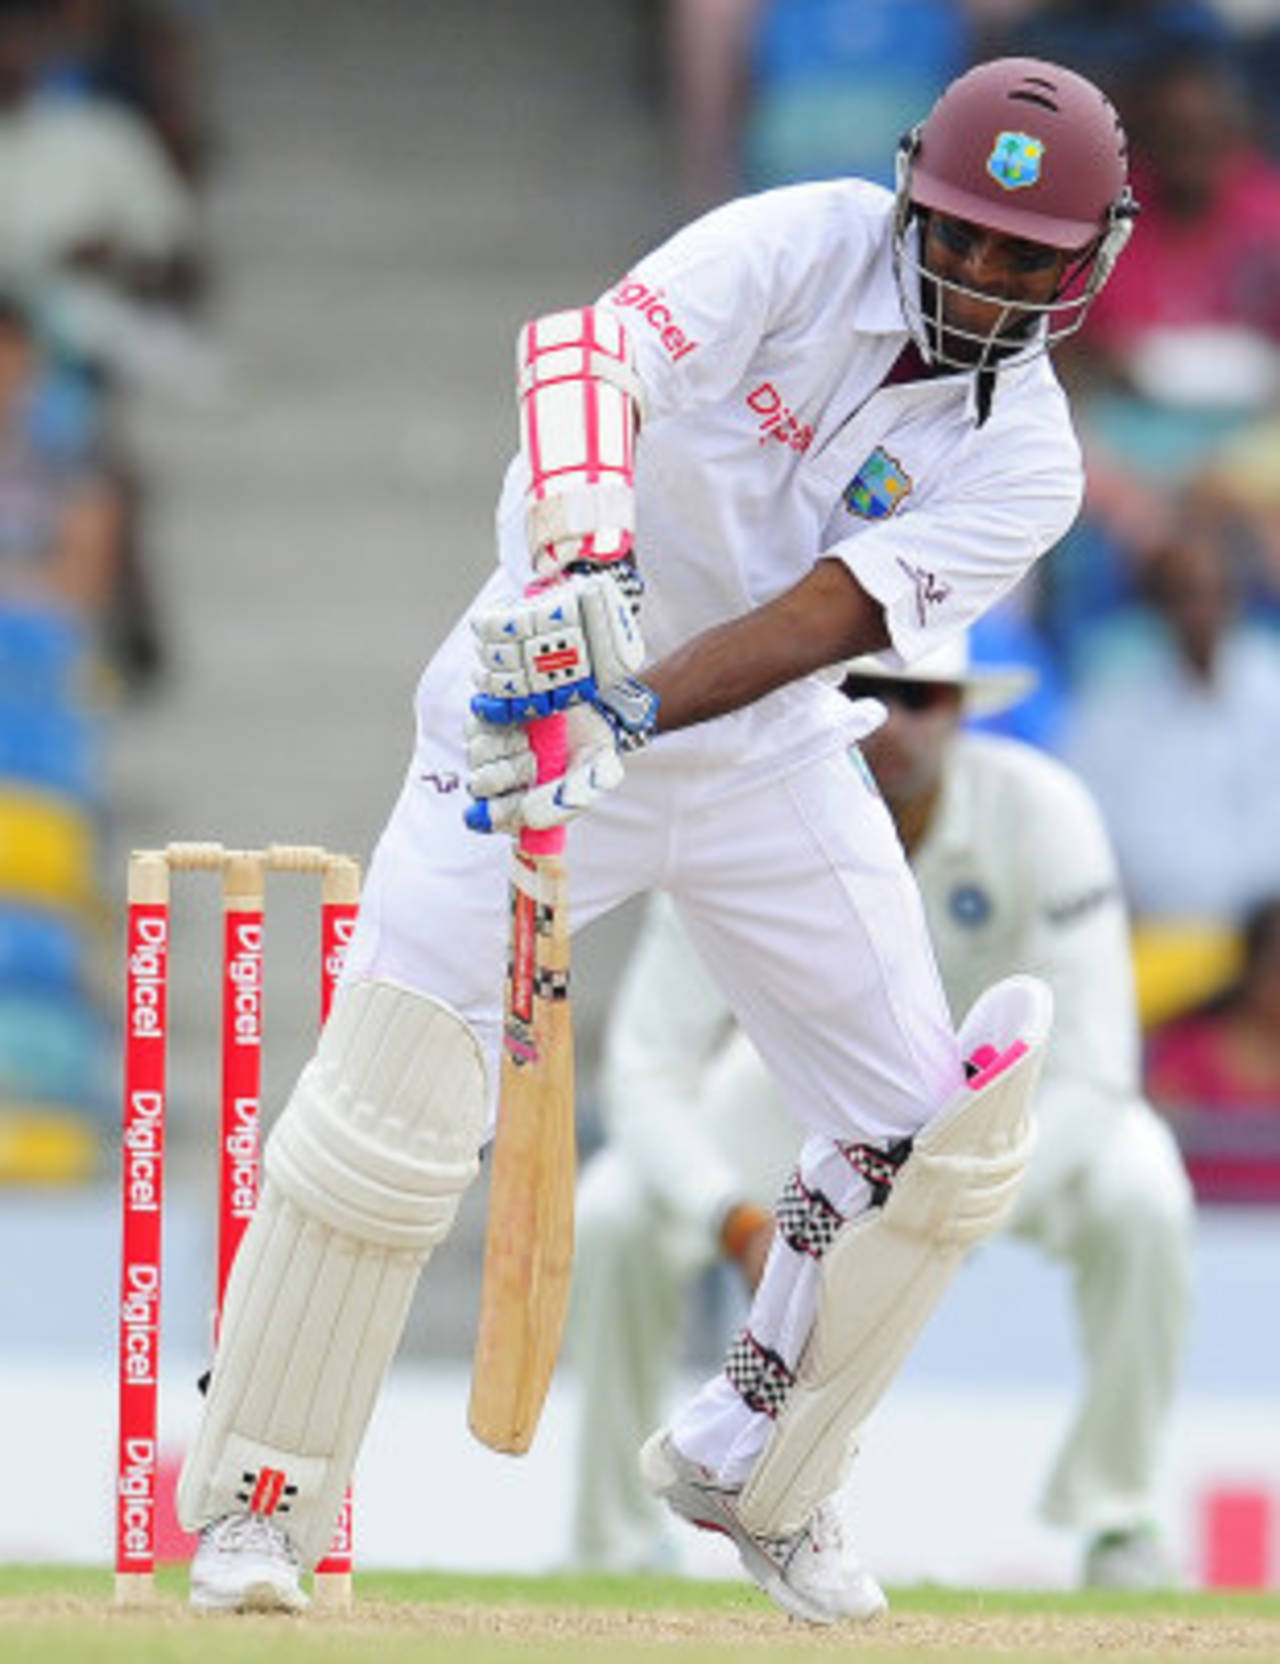 Shivnarine Chanderpaul weathered an incisive spell from the seamers, West Indies v India, 2nd Test, Bridgetown, 2nd day, June 29, 2011 